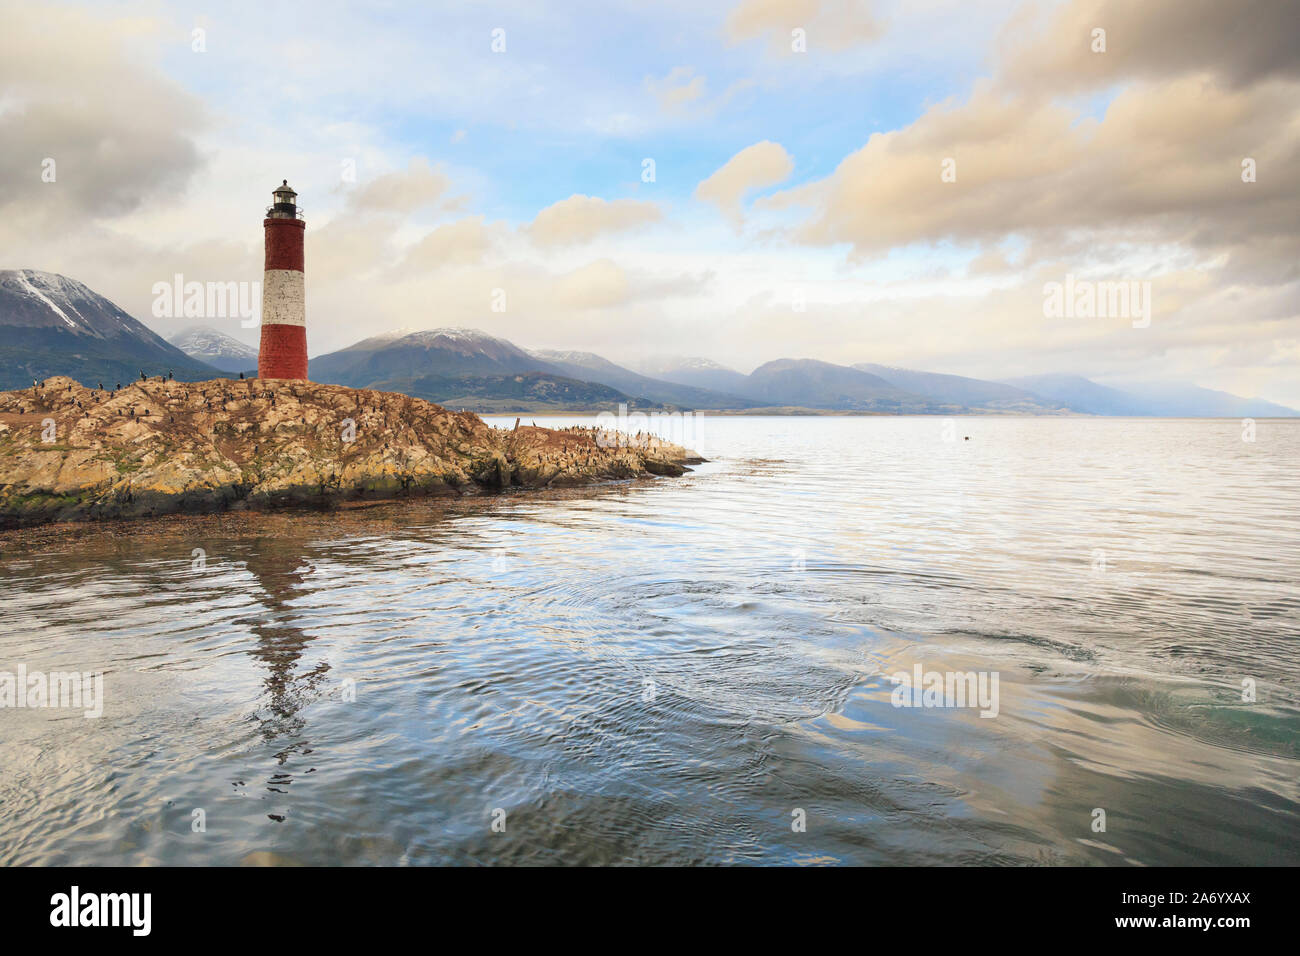 Argentina, Tierra del Fuego, Ushuaia, Beagle Channel, Les Eclaireurs Ligthouse Stock Photo